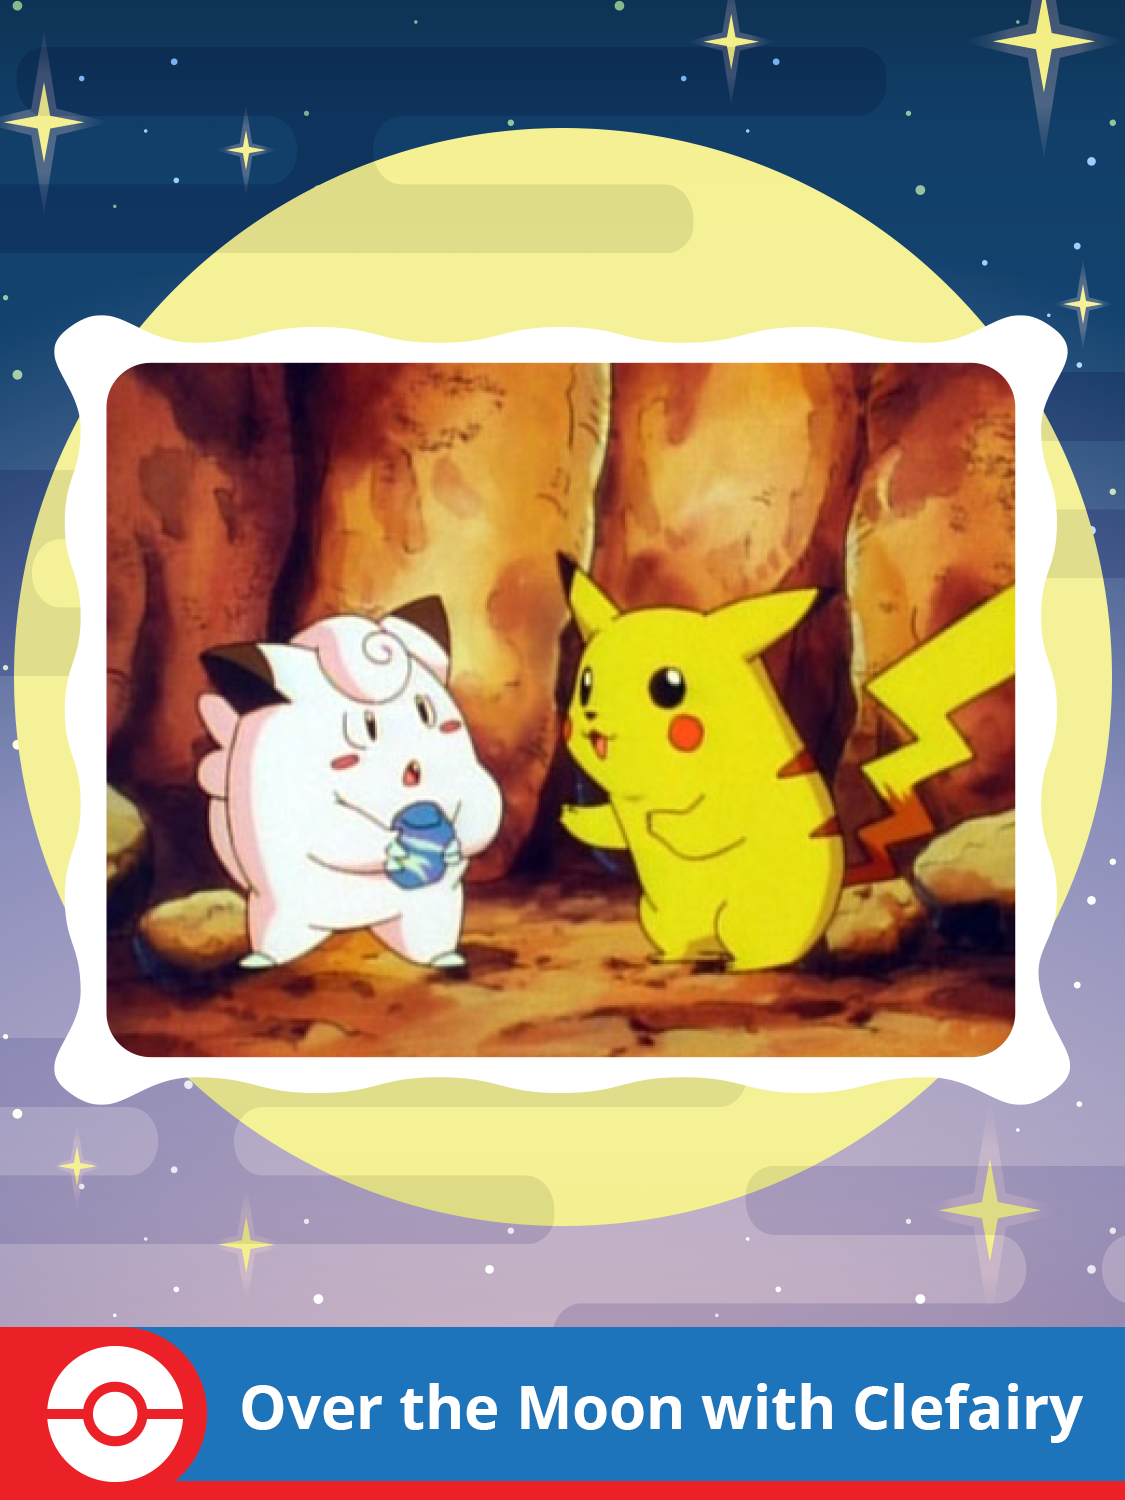 Over the Moon with Clefairy